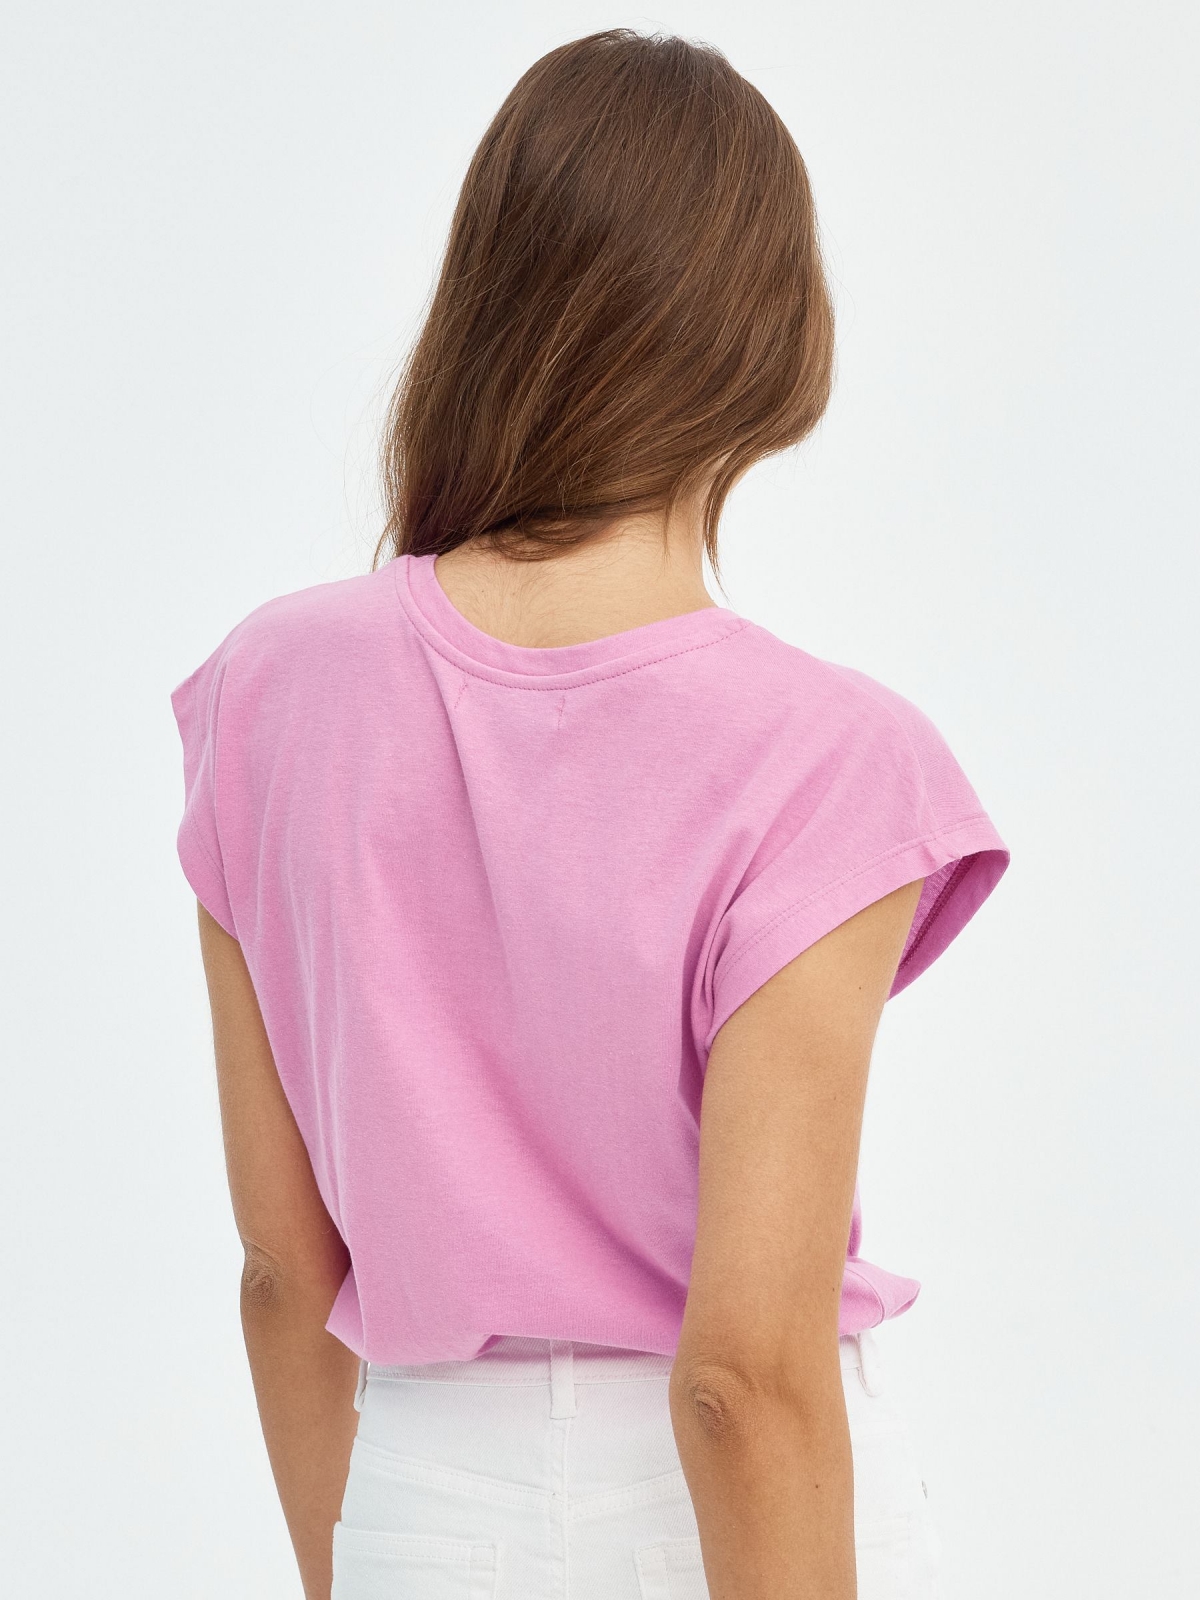 Noodle tank top magenta middle back view